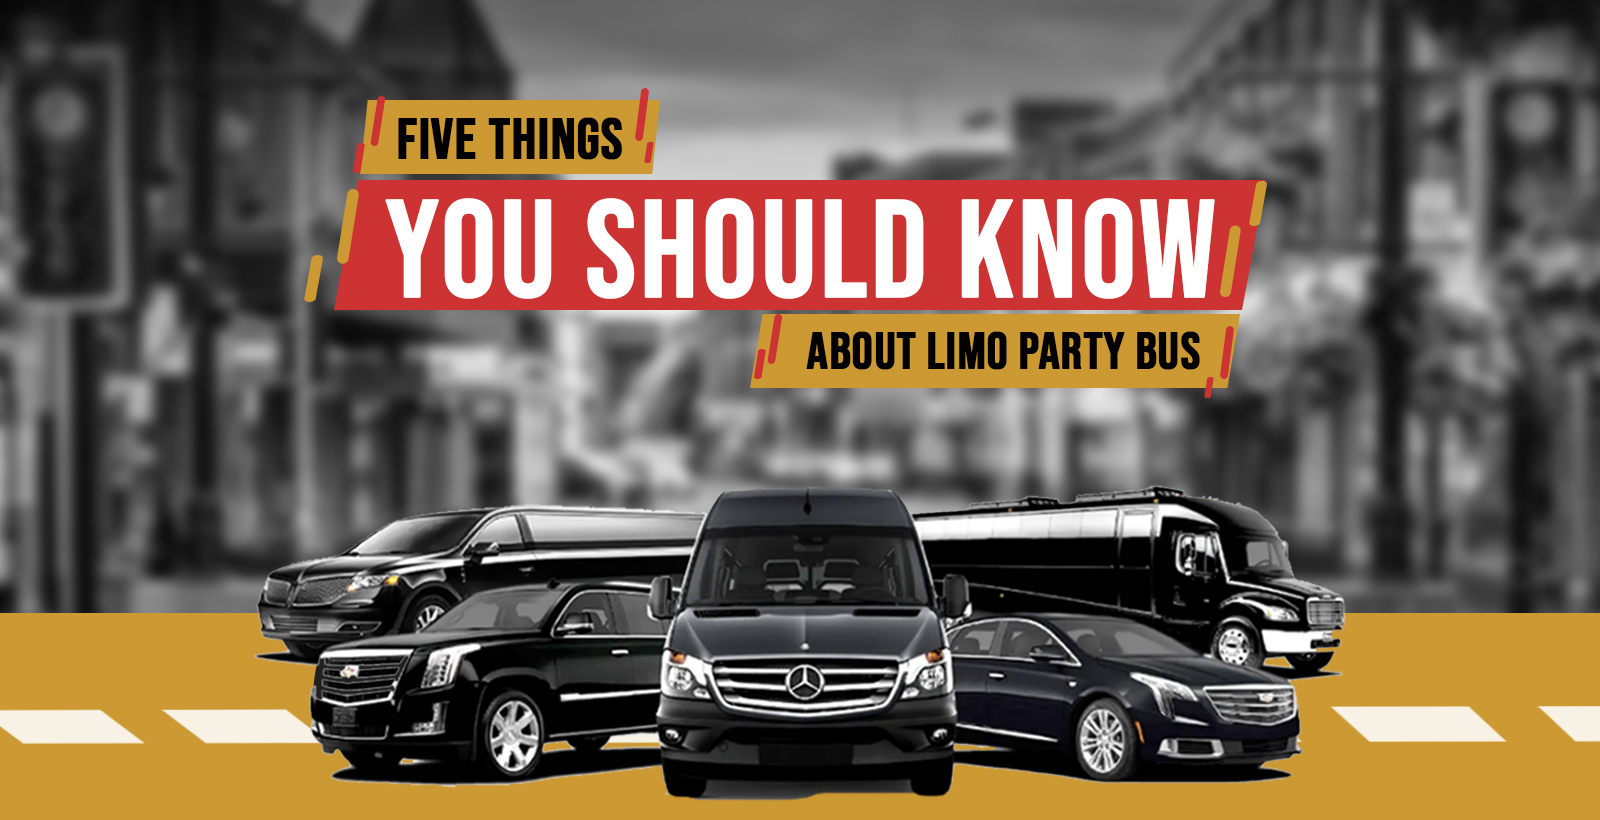 Five Things You Should Know About Limo Party Bus